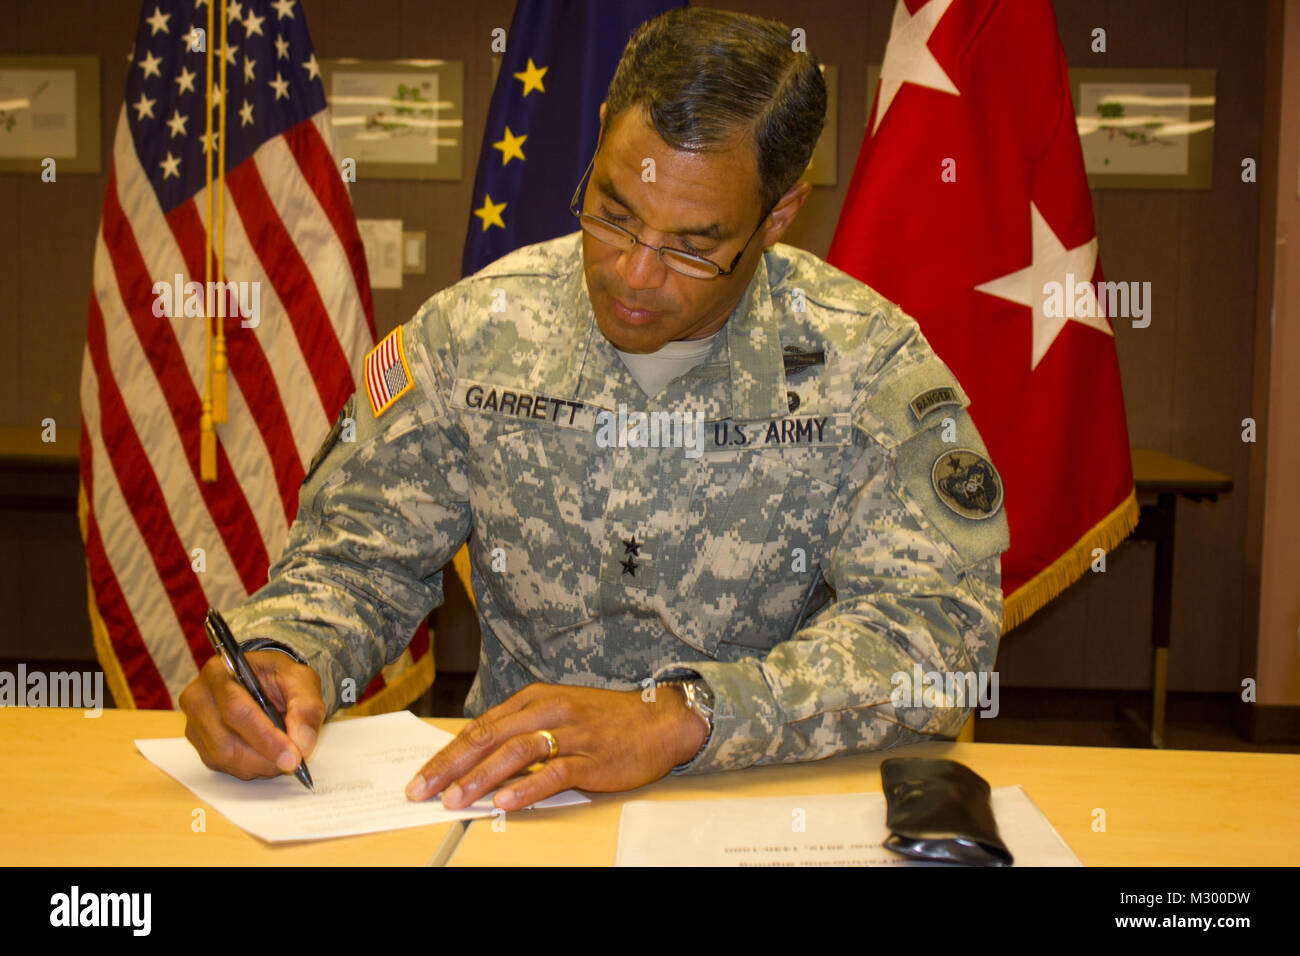 Maj. Gen. Michael Garrett, commander of U.S. Army Alaska, signs a memorandum of Acknowledgement for the establishment of the School Partnership Program during a meeting at the Fairbanks North Star Burough school District building in Fairbanks, Alaska Sept. 10. The program which was initiated by former USARAK Commander Lt. Gen. William Troy, brings together the local Fairbanks Community with the various Army units throughout Alaska in an effort to help strengthen an already strong relationship. (U.S. Army Photo By: Sgt. Thomas Duval, 1/25 SBCT Public Affairs) 120910-A-BE343-009 by 1 Stryker Bri Stock Photo